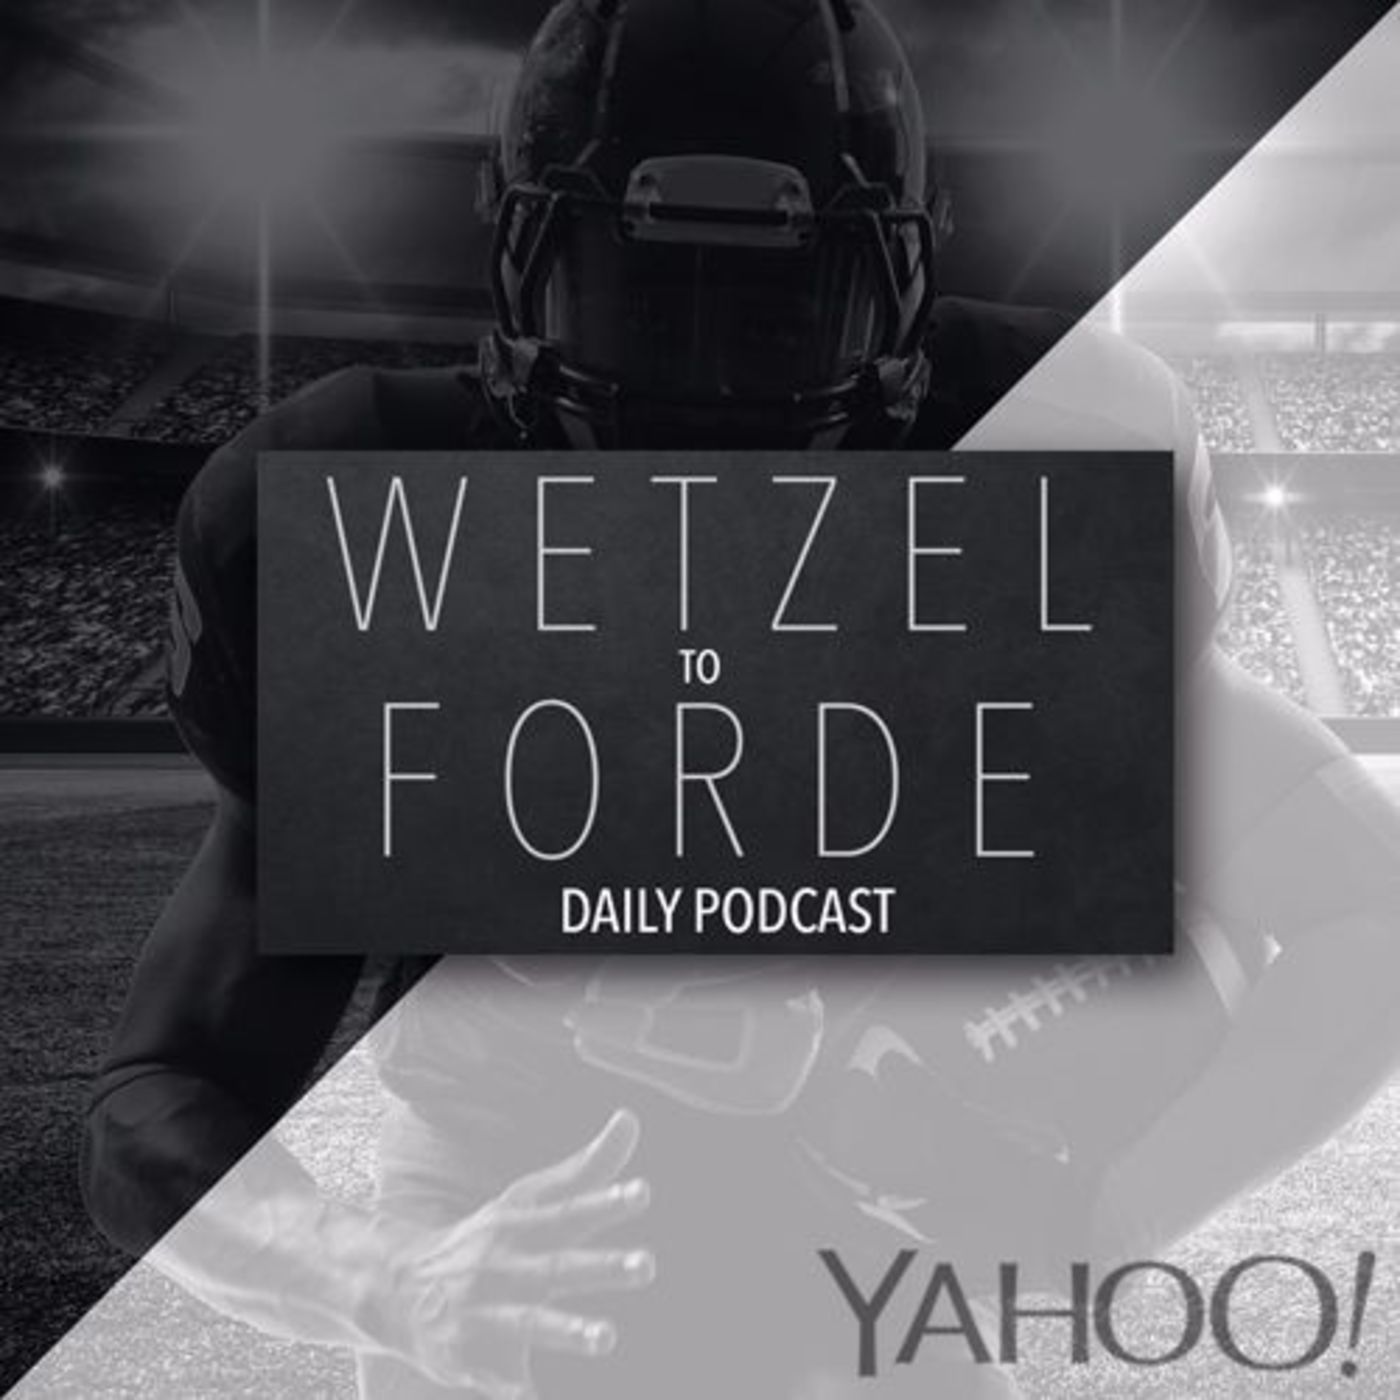 Which franchises are headed to LA? Burfict suspended. Wetzel To Forde (1 - 12 - 16)